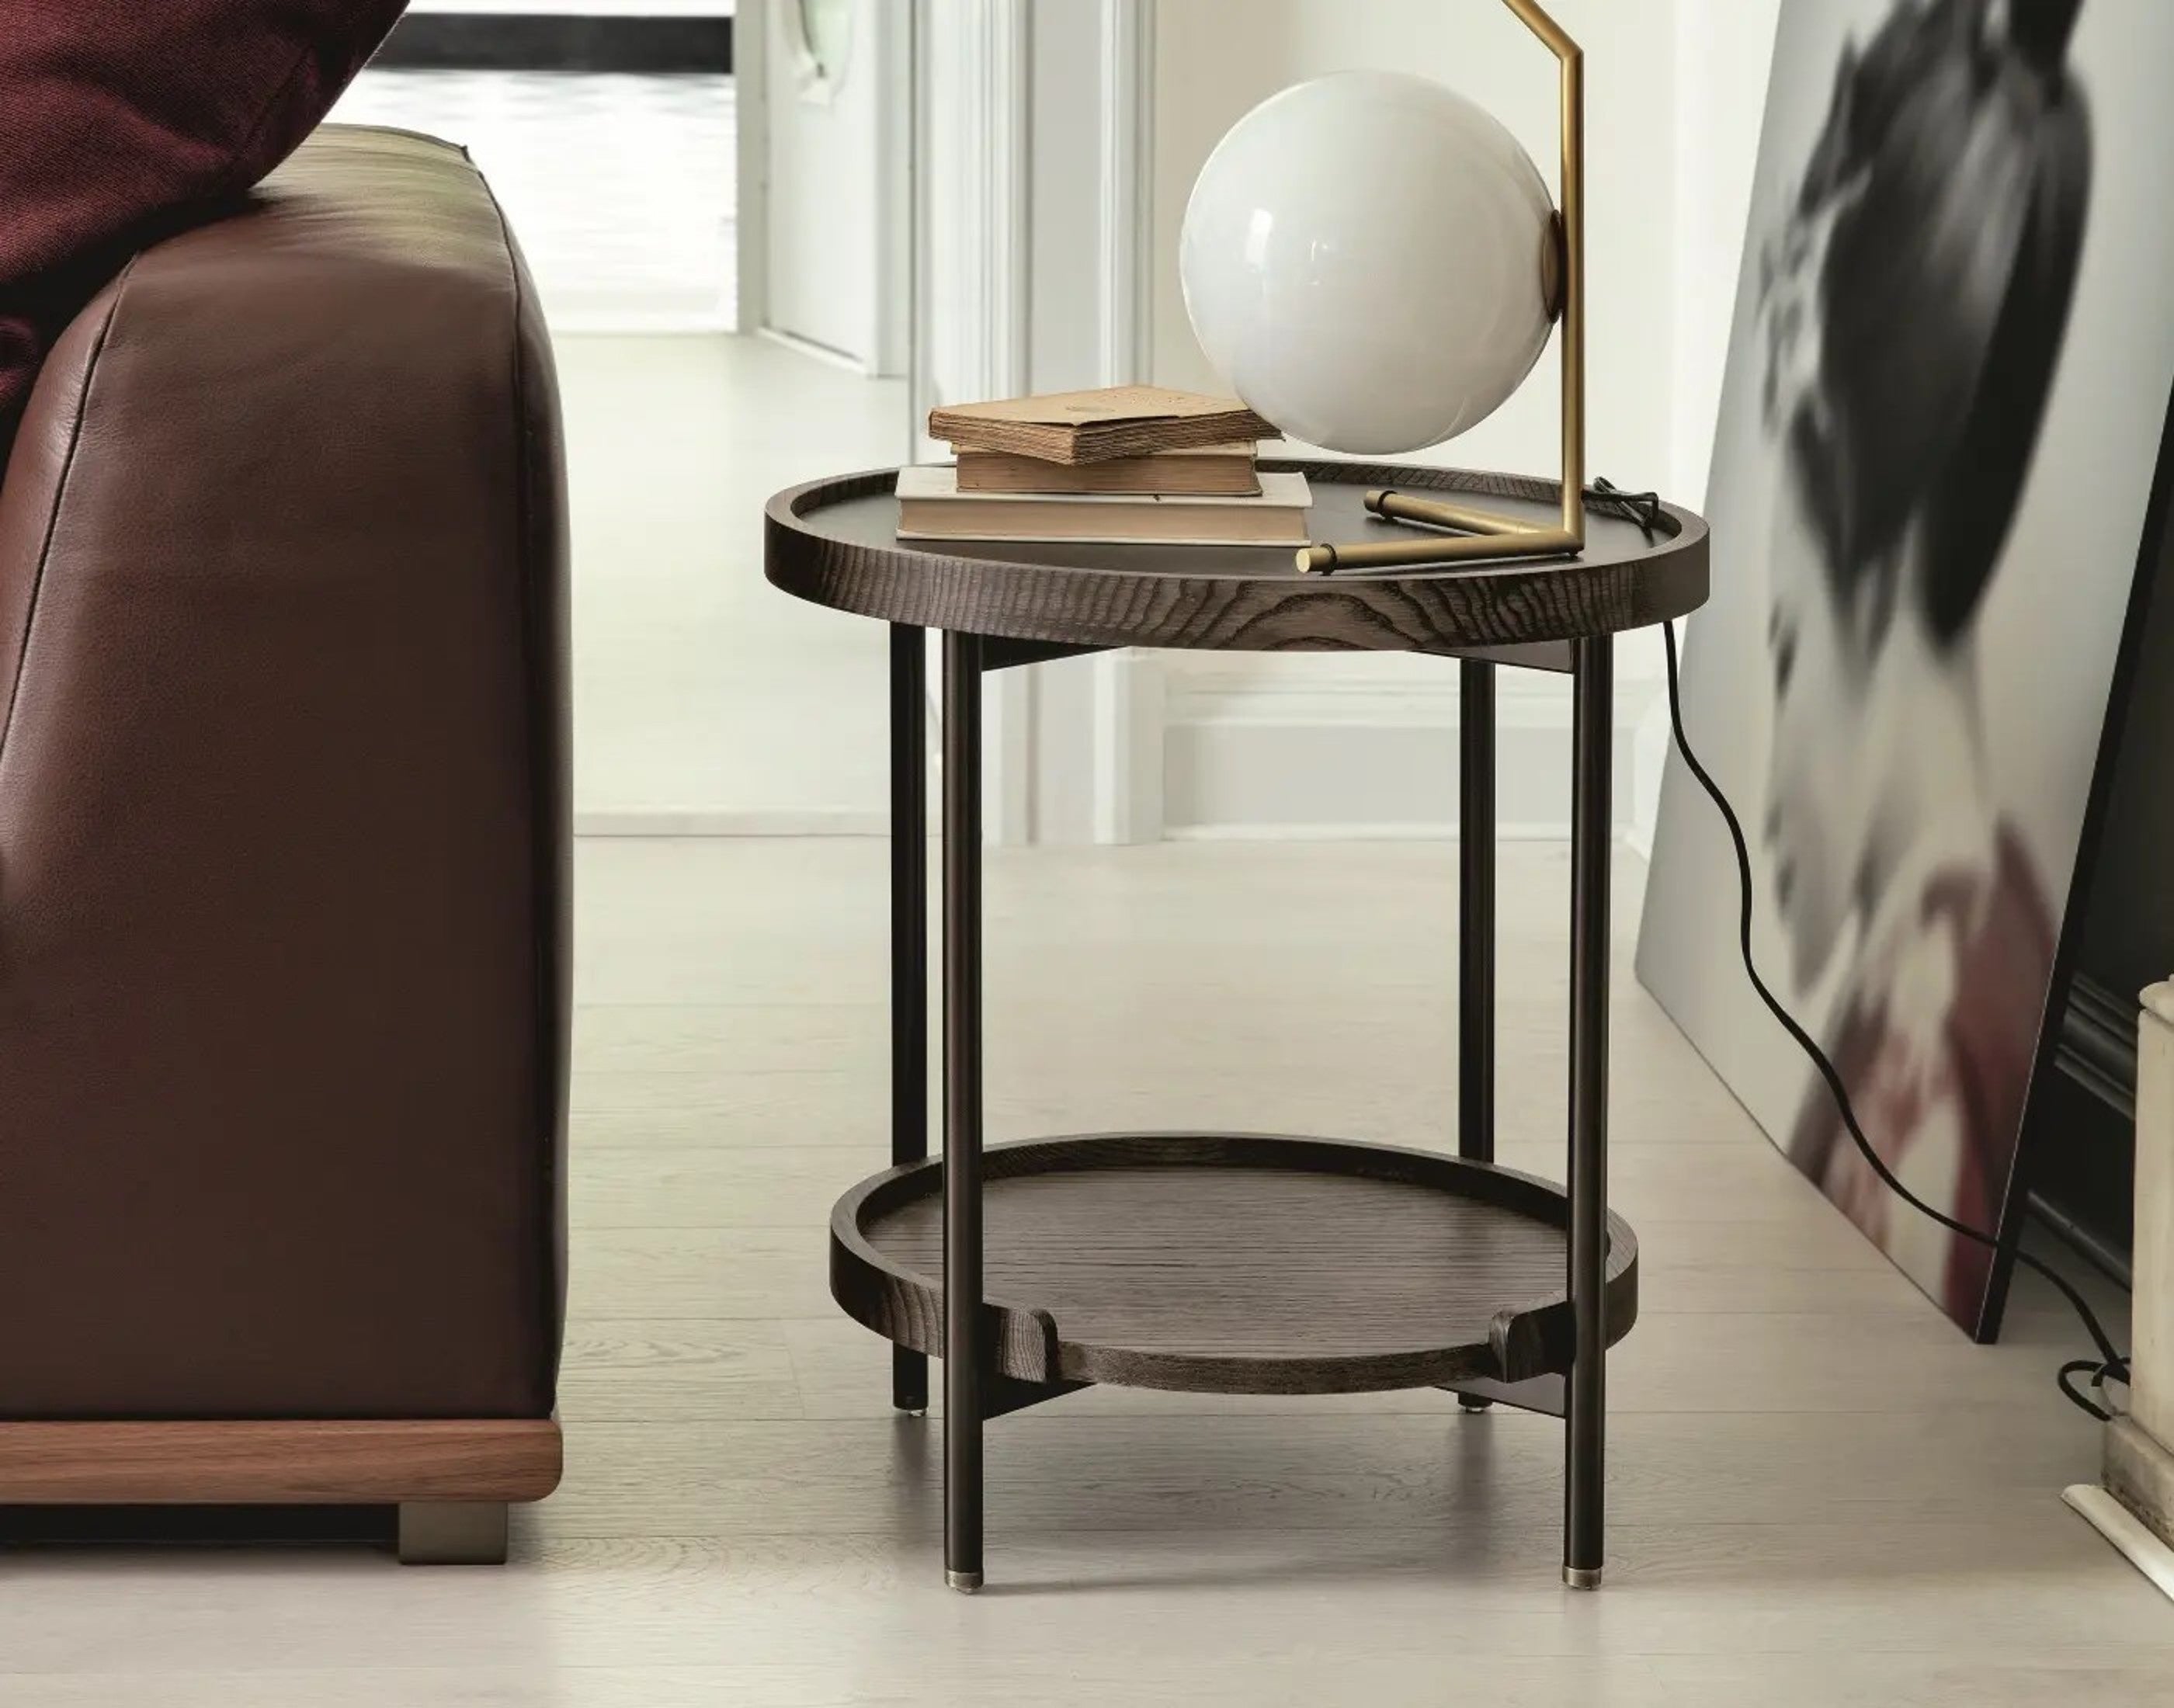 KOSTER 50 WOOD - Side Table